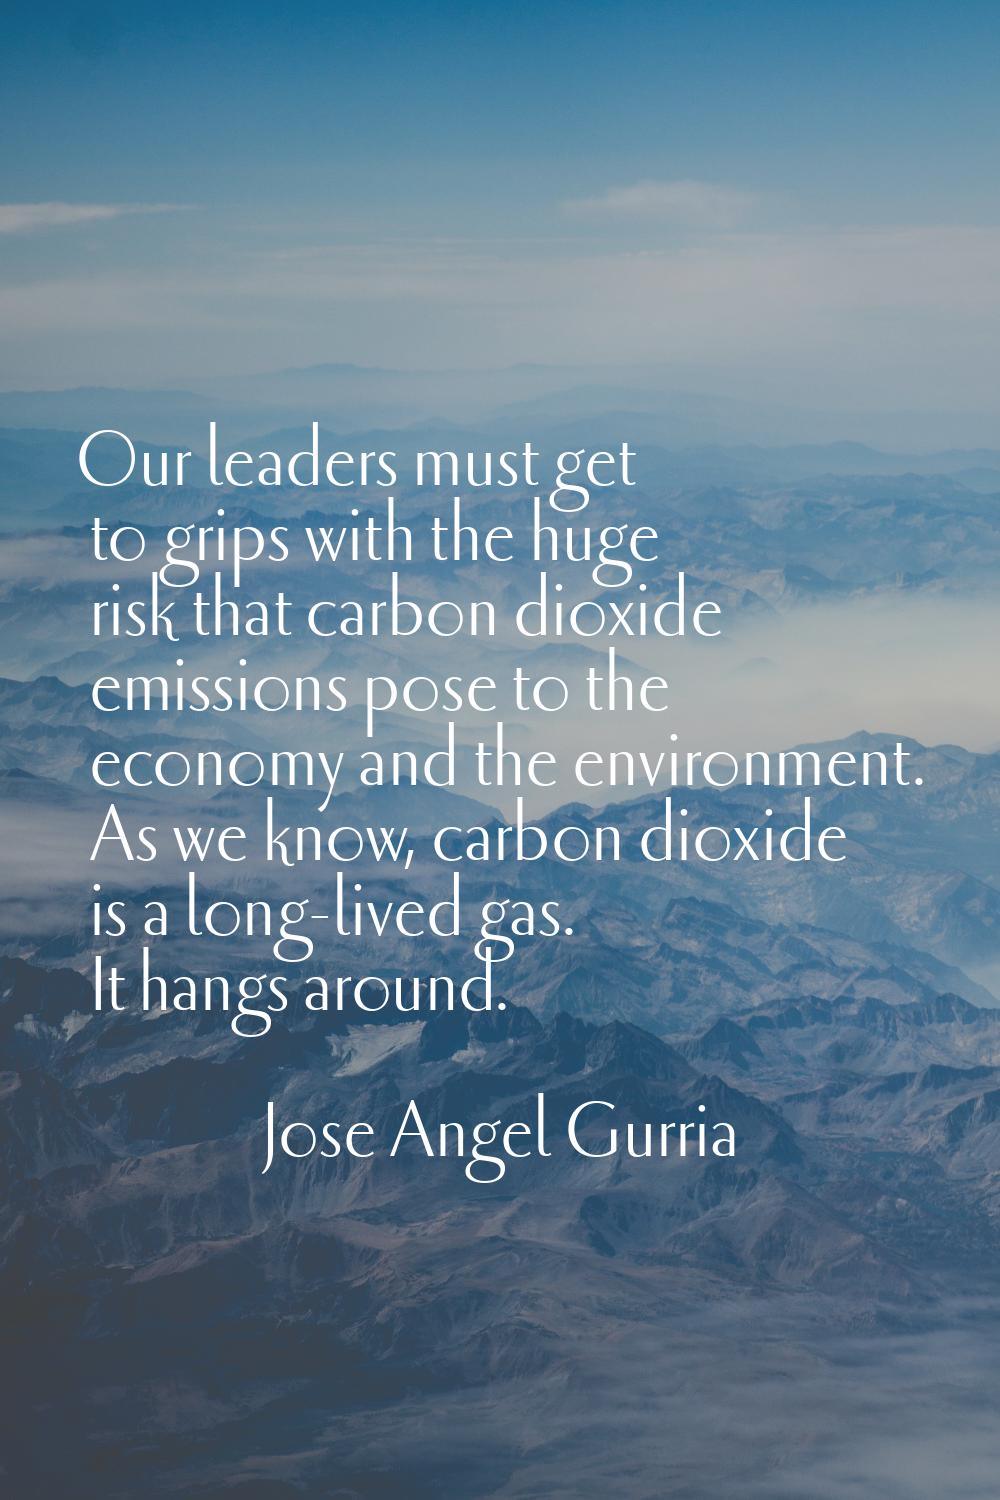 Our leaders must get to grips with the huge risk that carbon dioxide emissions pose to the economy 